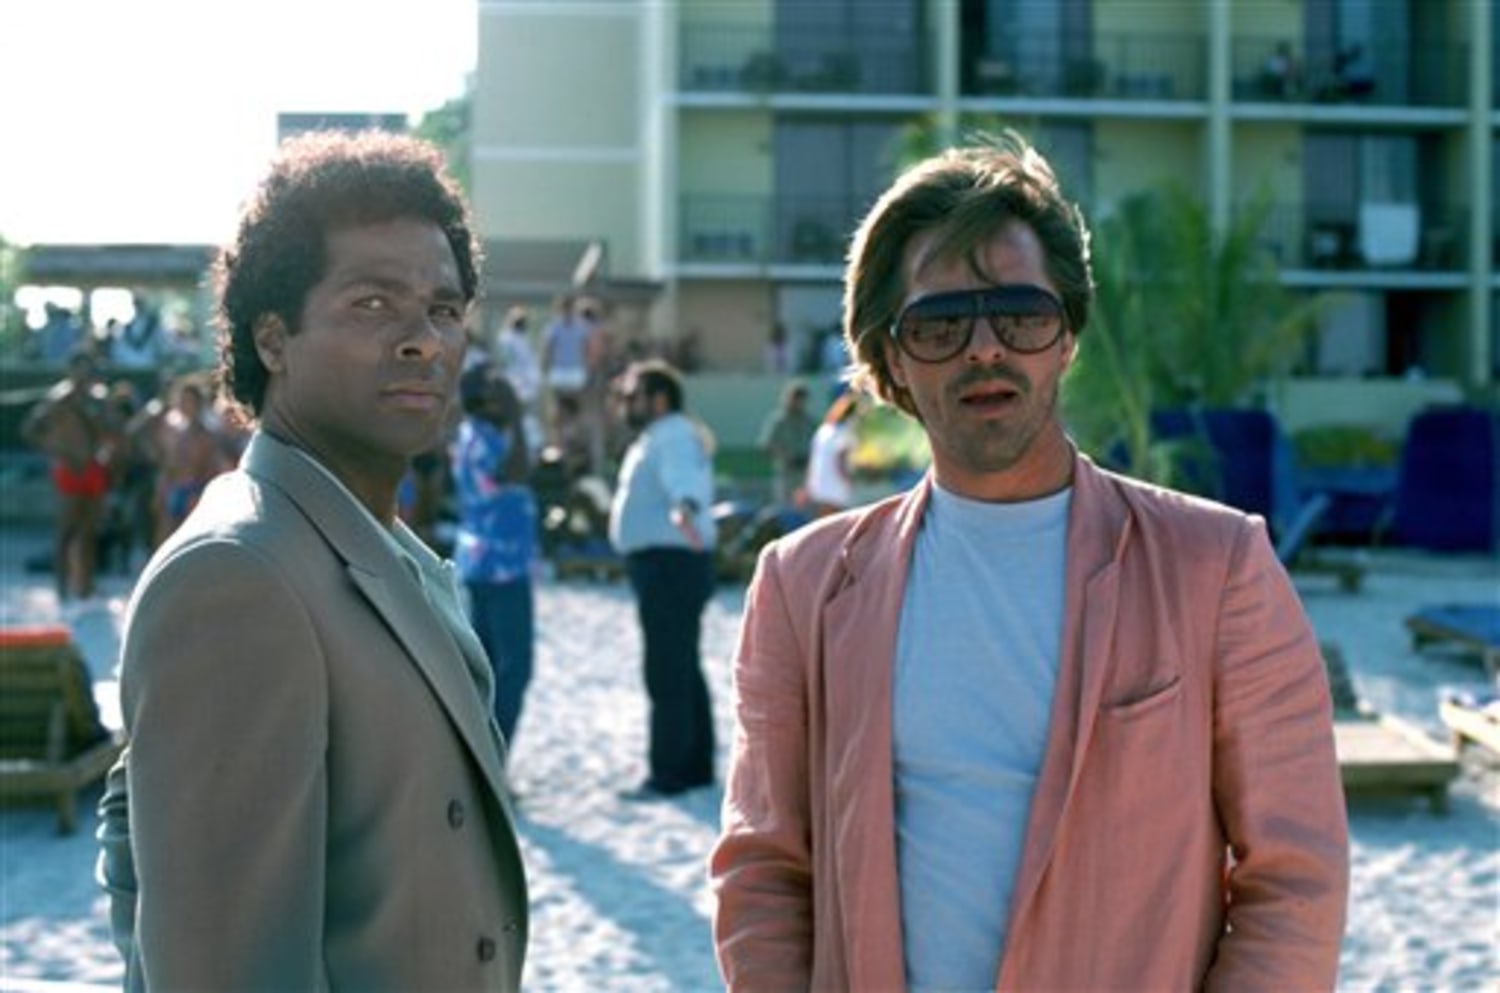 Miami Vice' returns, but doesn't look back